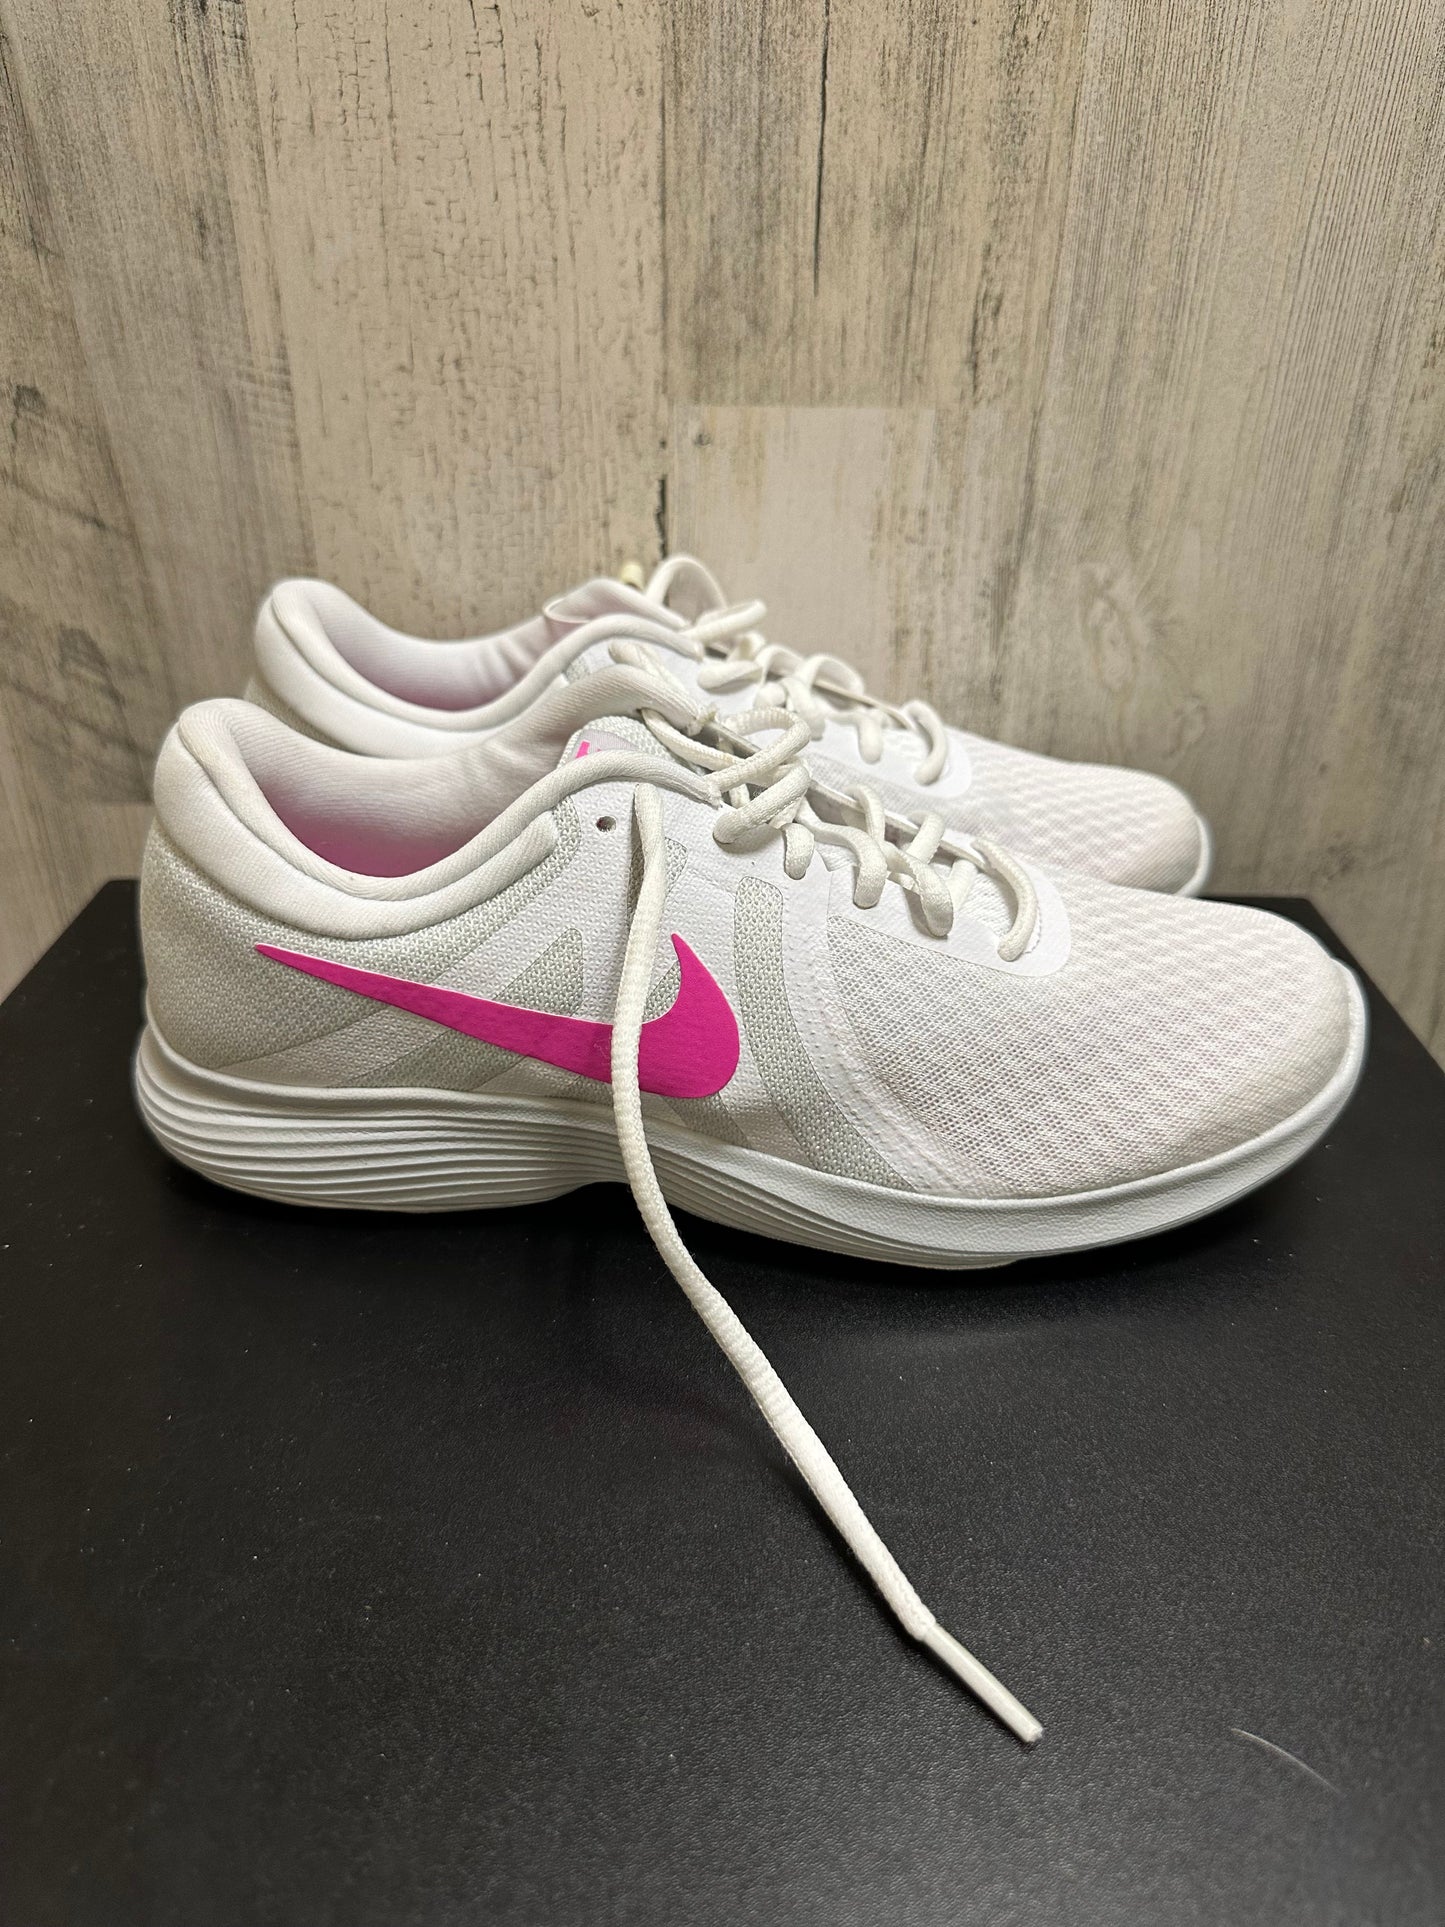 Pink & White Shoes Sneakers Nike, Size 8.5